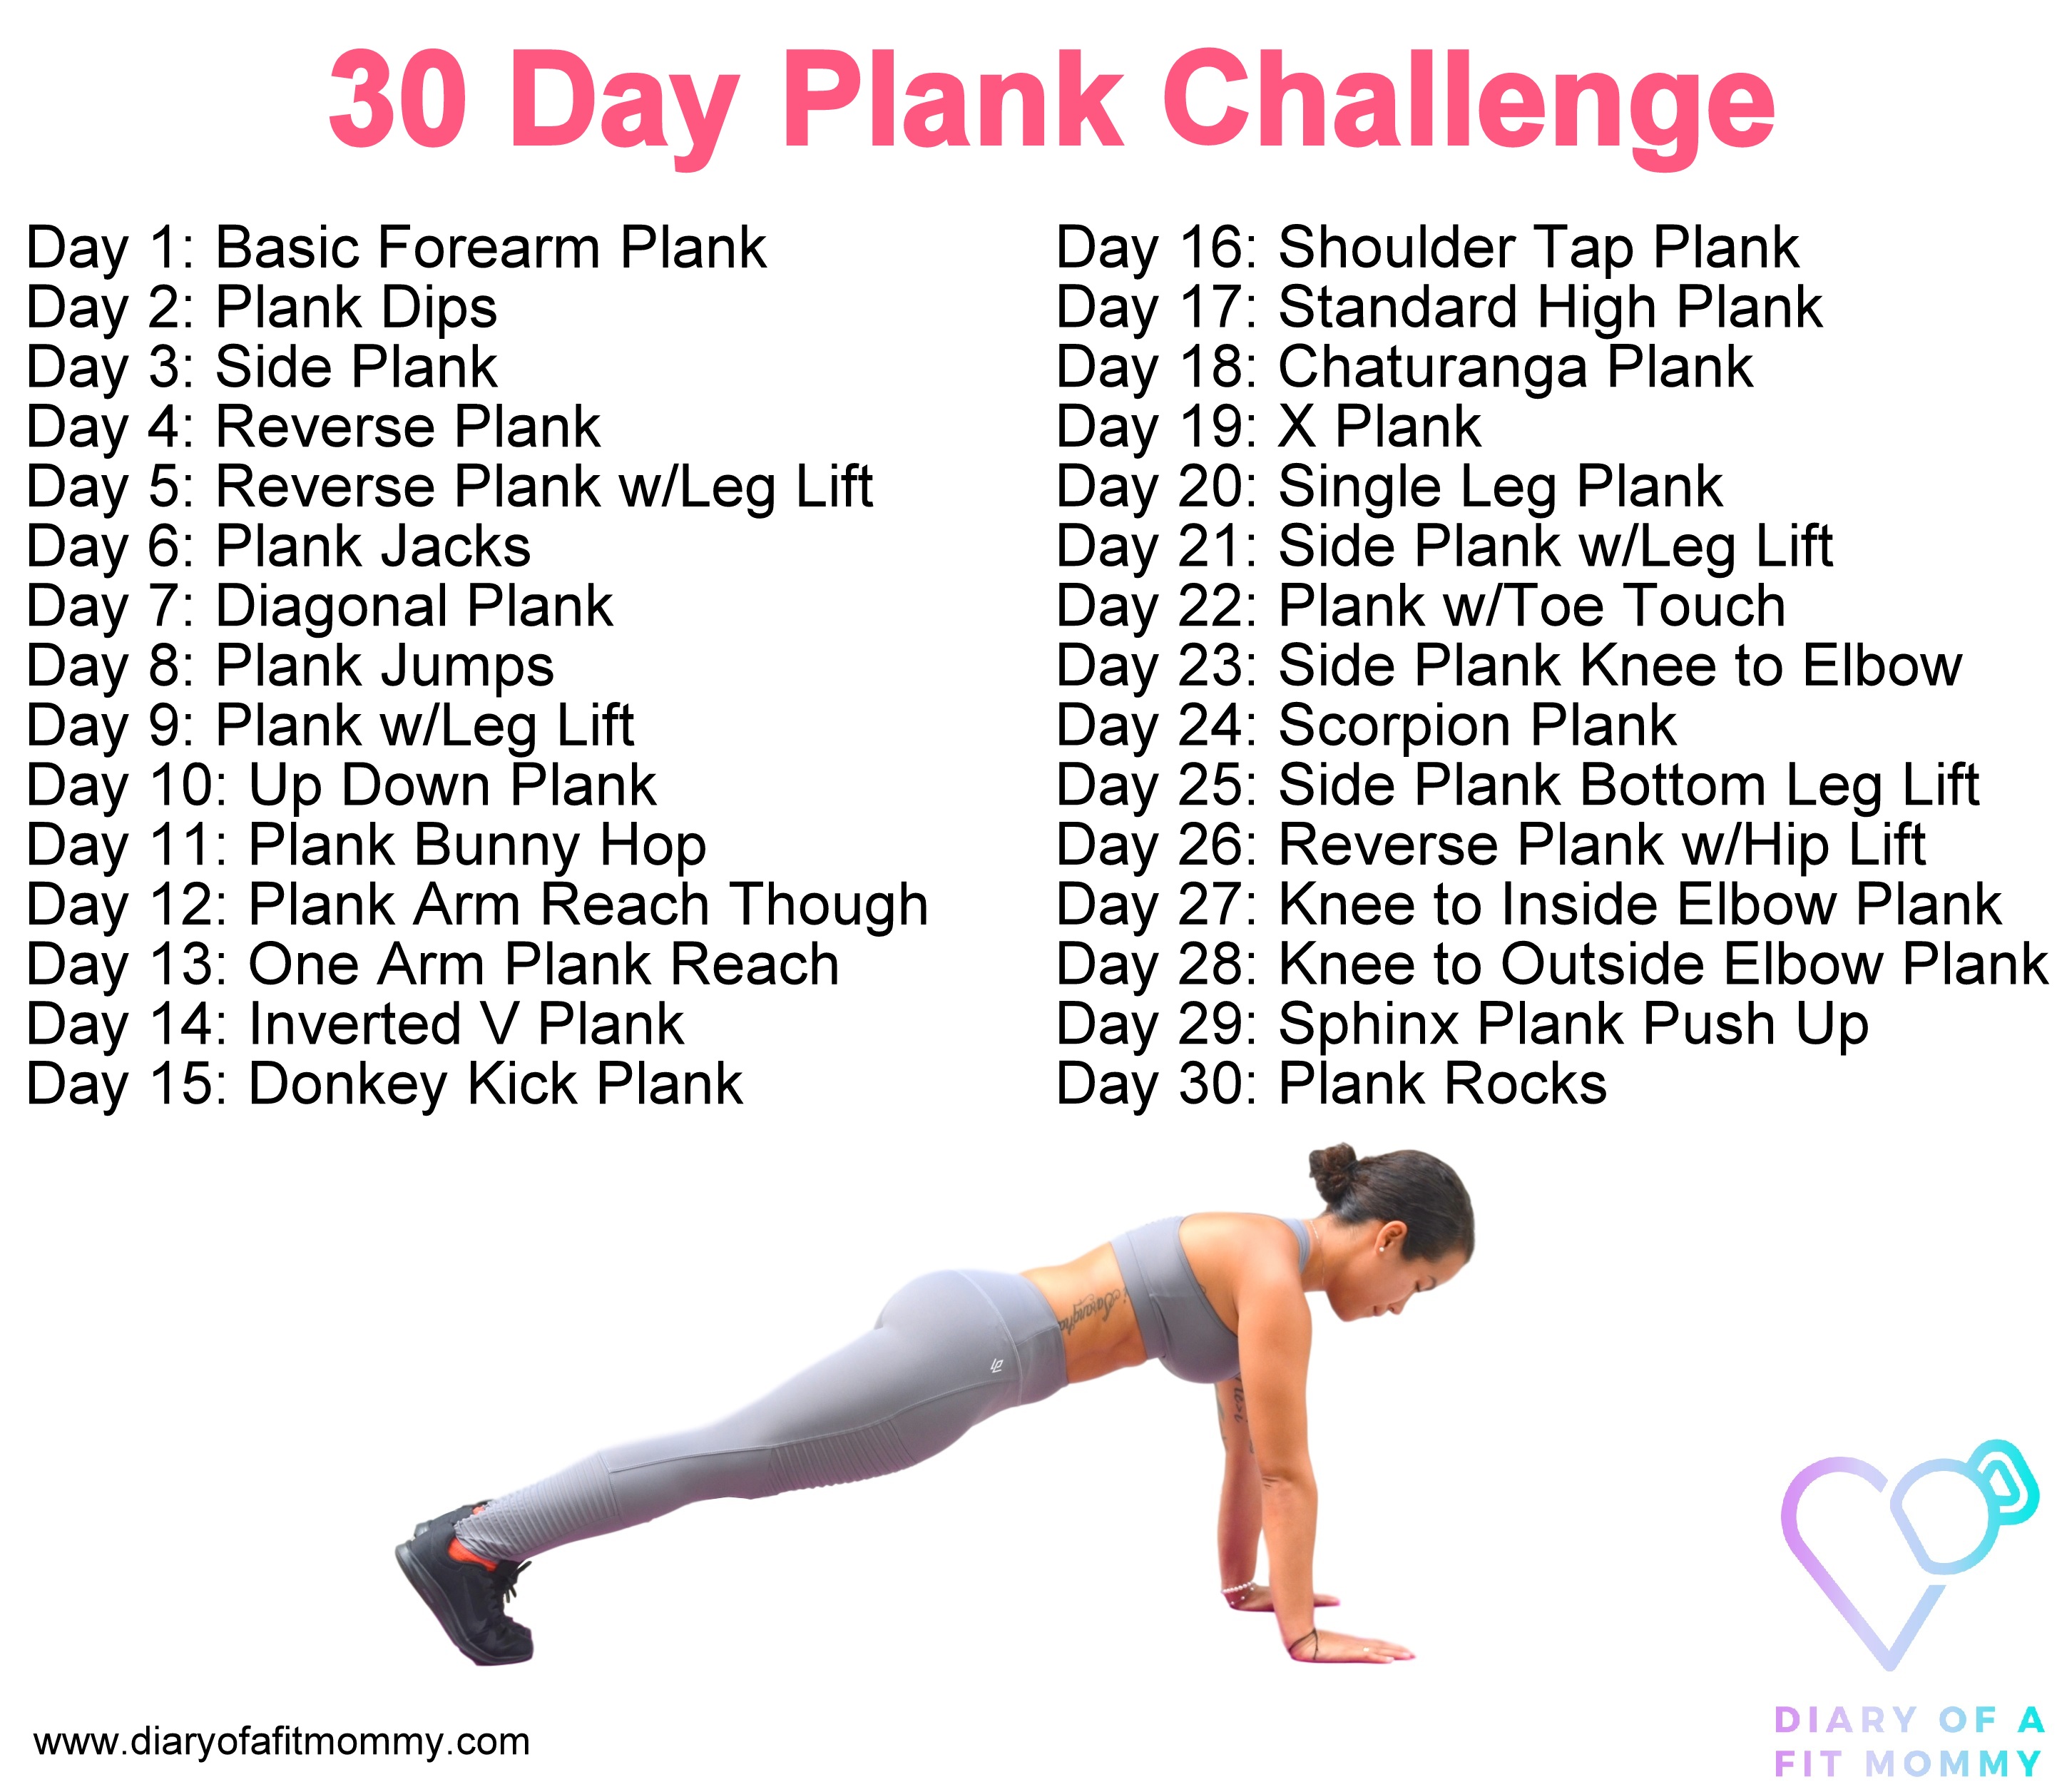 30 day plank challenge printable in word 86